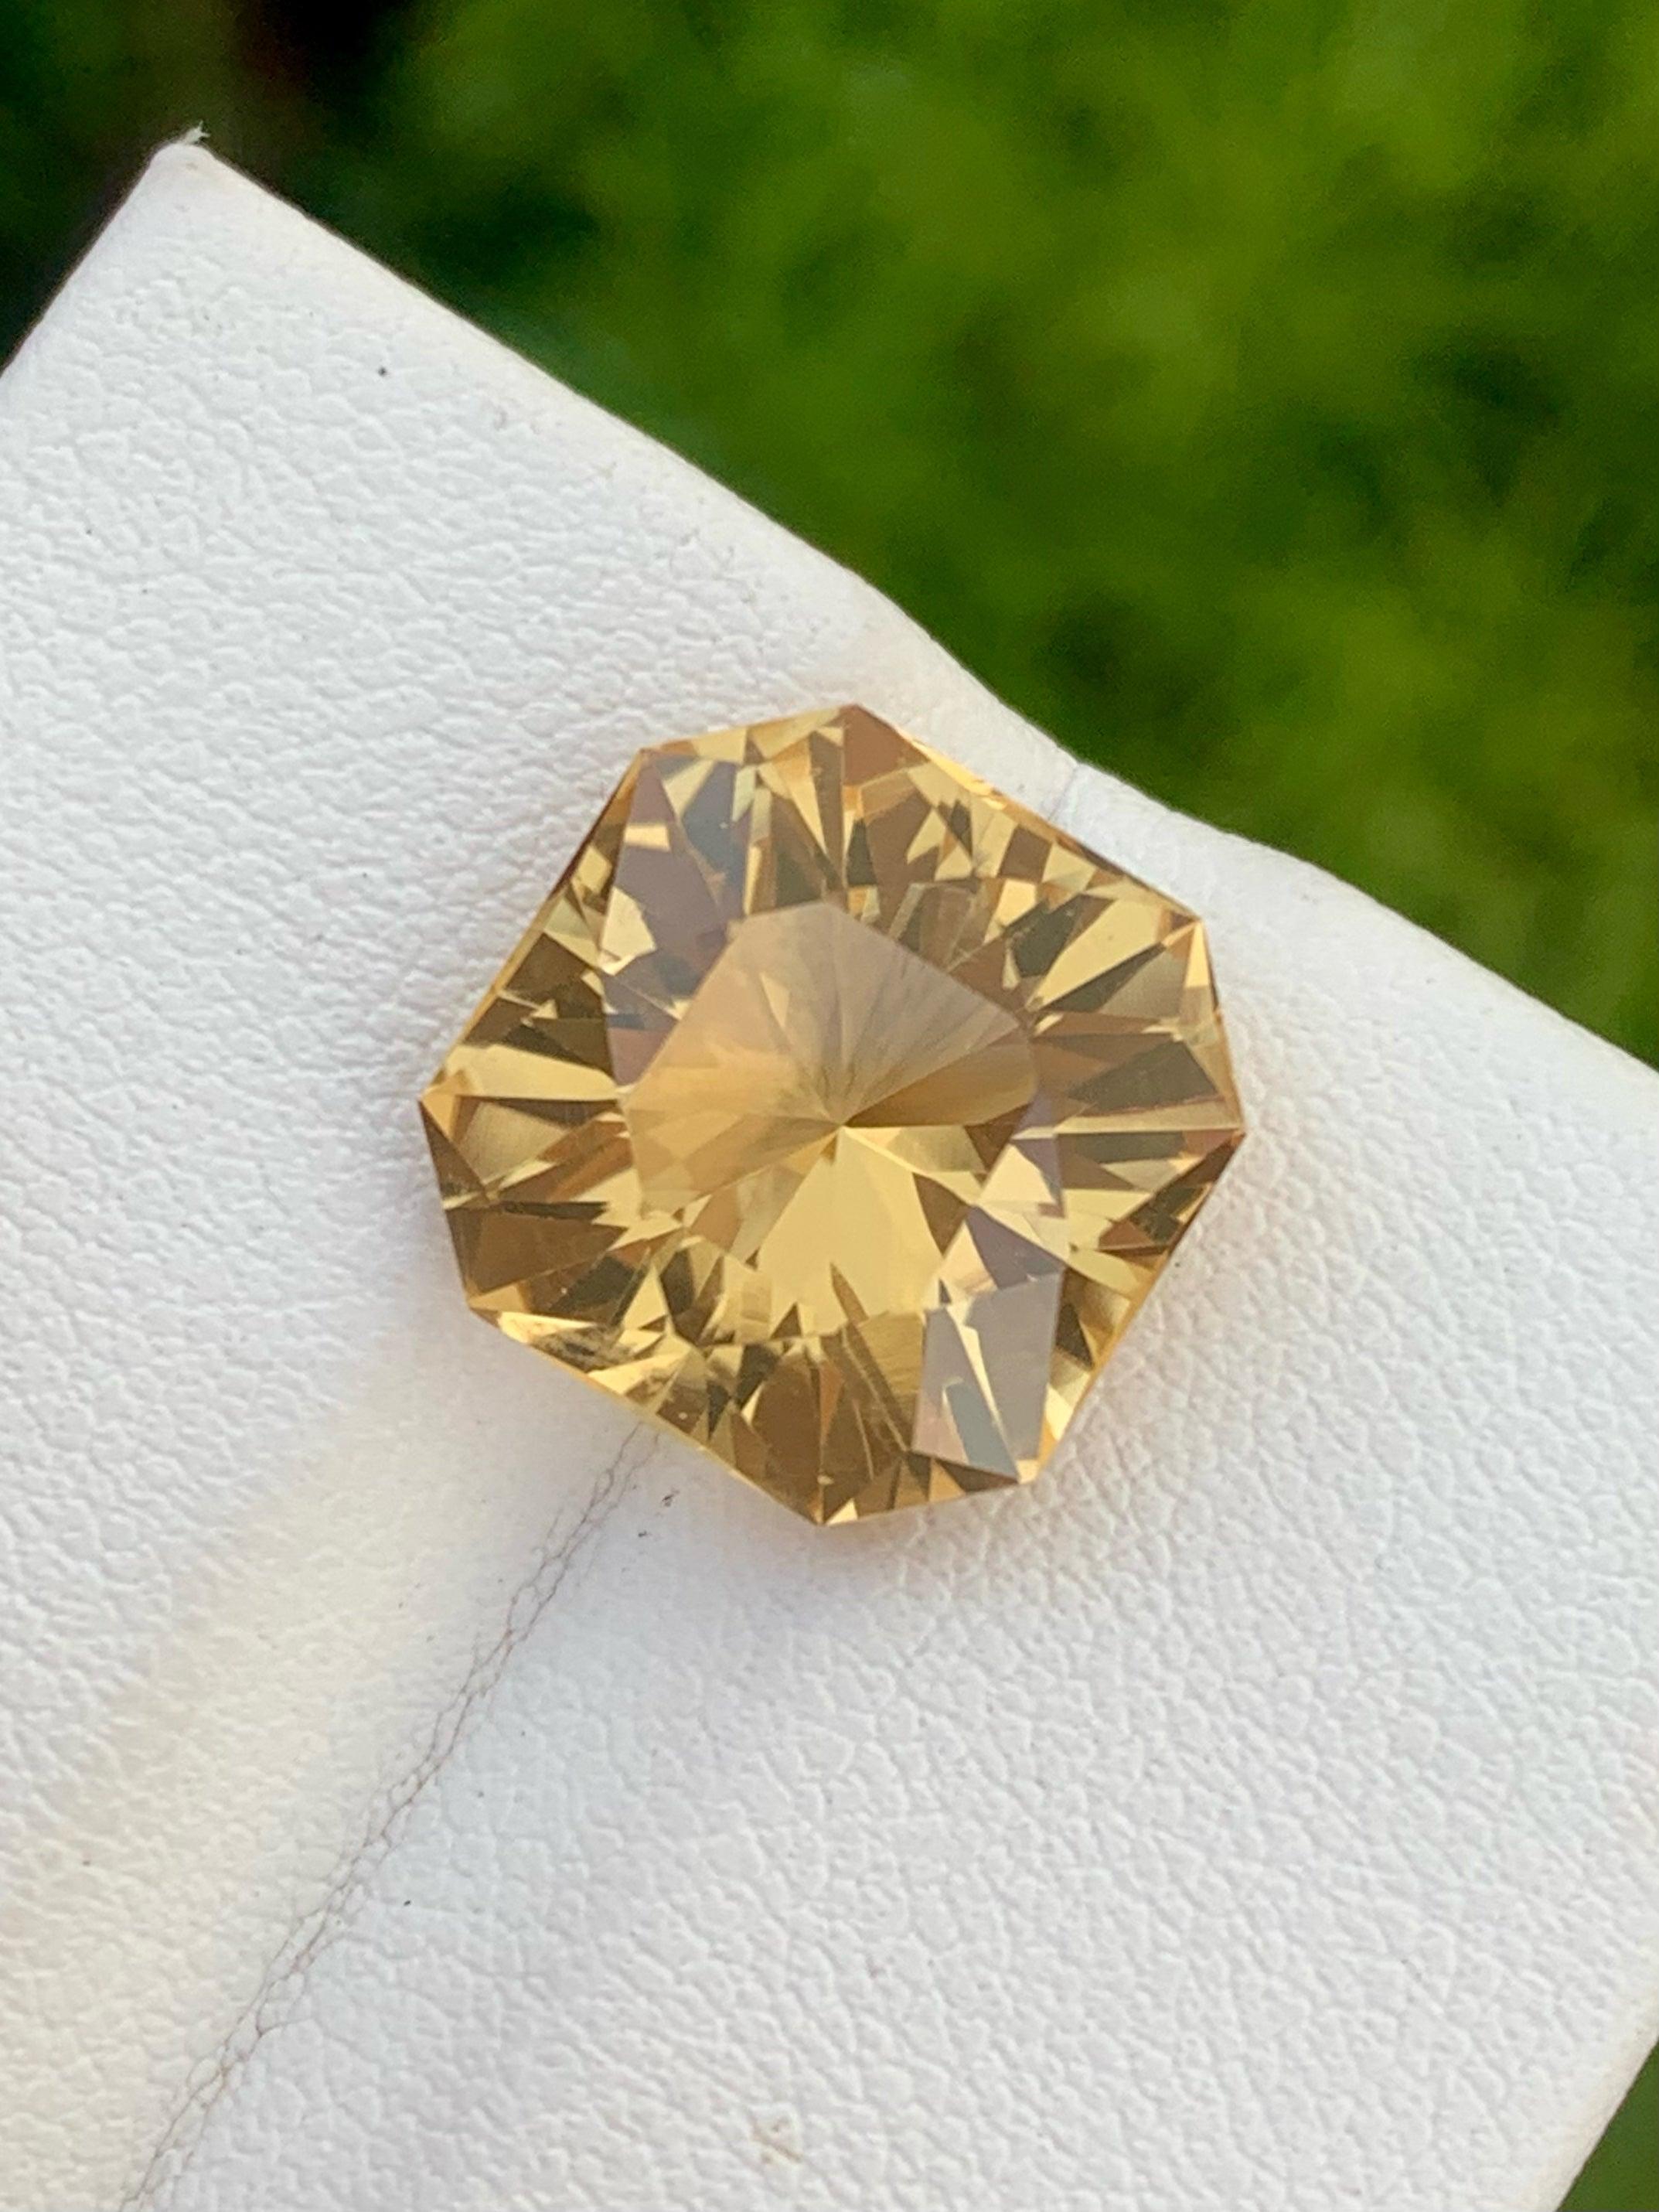 Fantastic Natural Citrine Loose Gemstone, Available for sale at whole sale price natural high quality 7.90 Carats Loupe Clean Clarity Unheated Citrine From Brazil.

Product Information:
GEMSTONE TYPE:	Fantastic Natural Citrine Loose